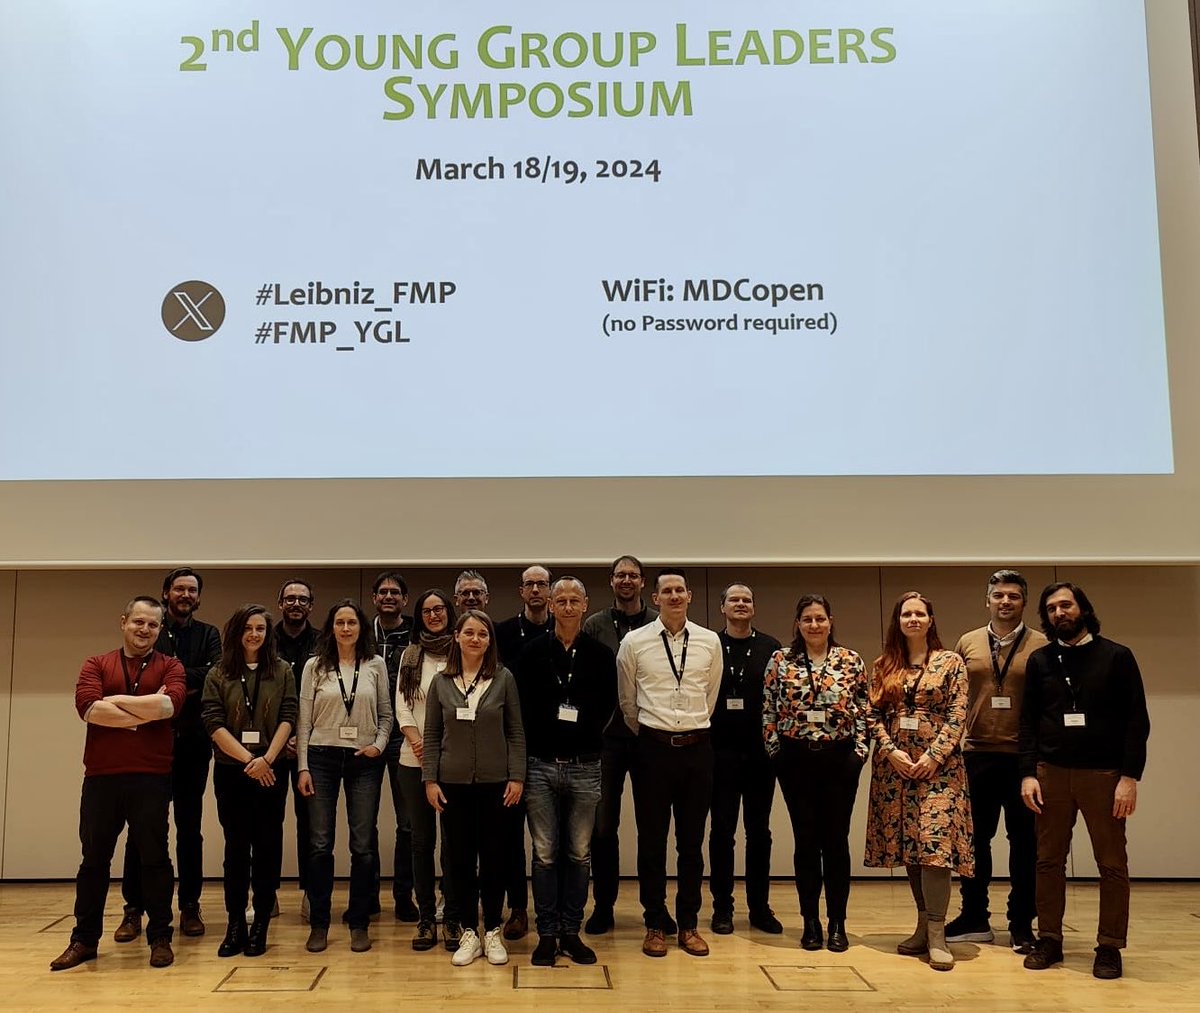 After 2 days of intense science: thanks all for participating at the 2nd Young Group Leader Symposium! Amazing crew 🤩 ⁦@LeibnizFMP⁩ #YGL2024